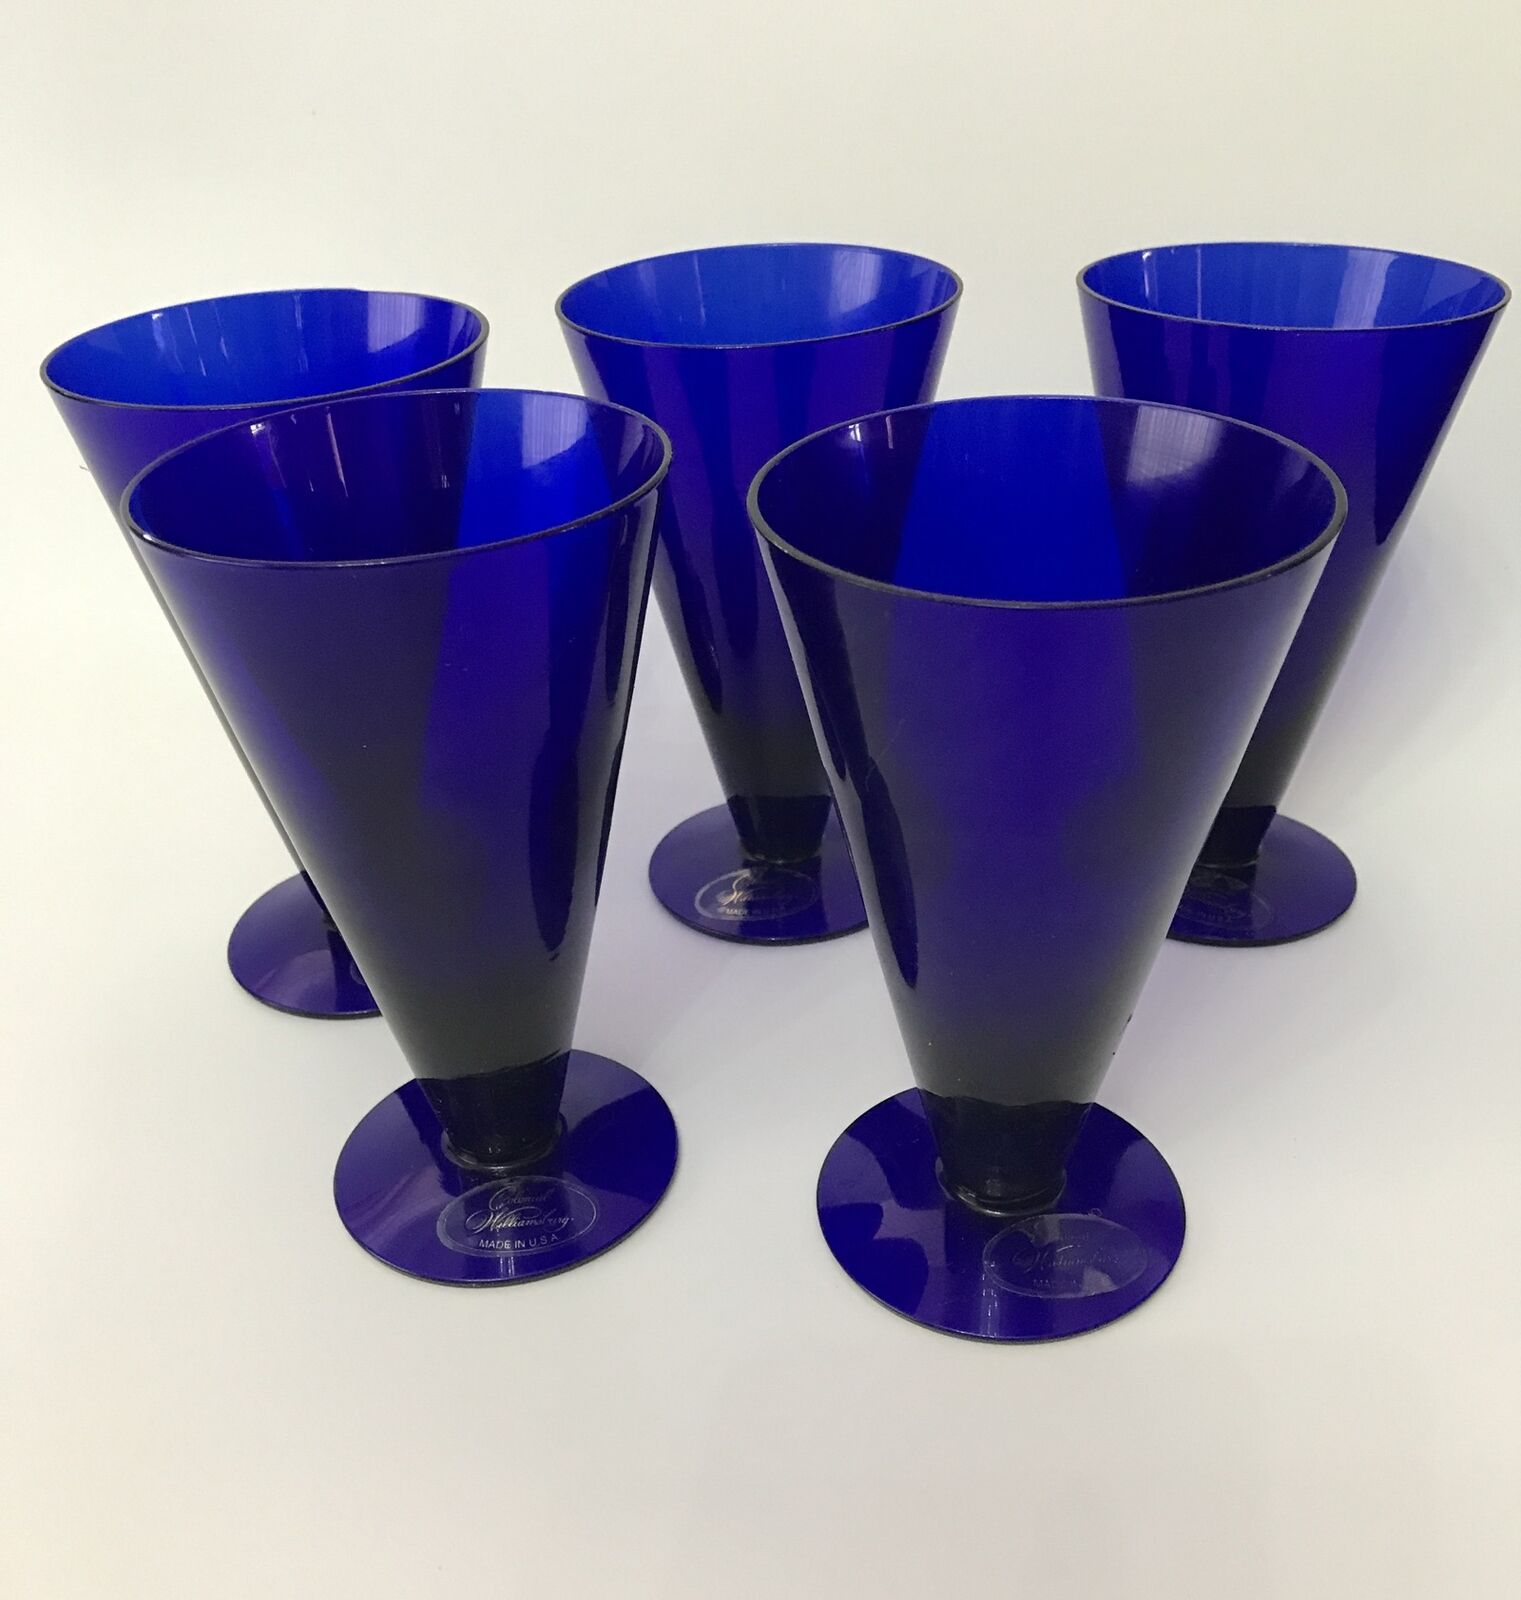 5 X Cobalt Blue Colonial Williamsburg By Judel Drinking Glasses 8 Oz. New